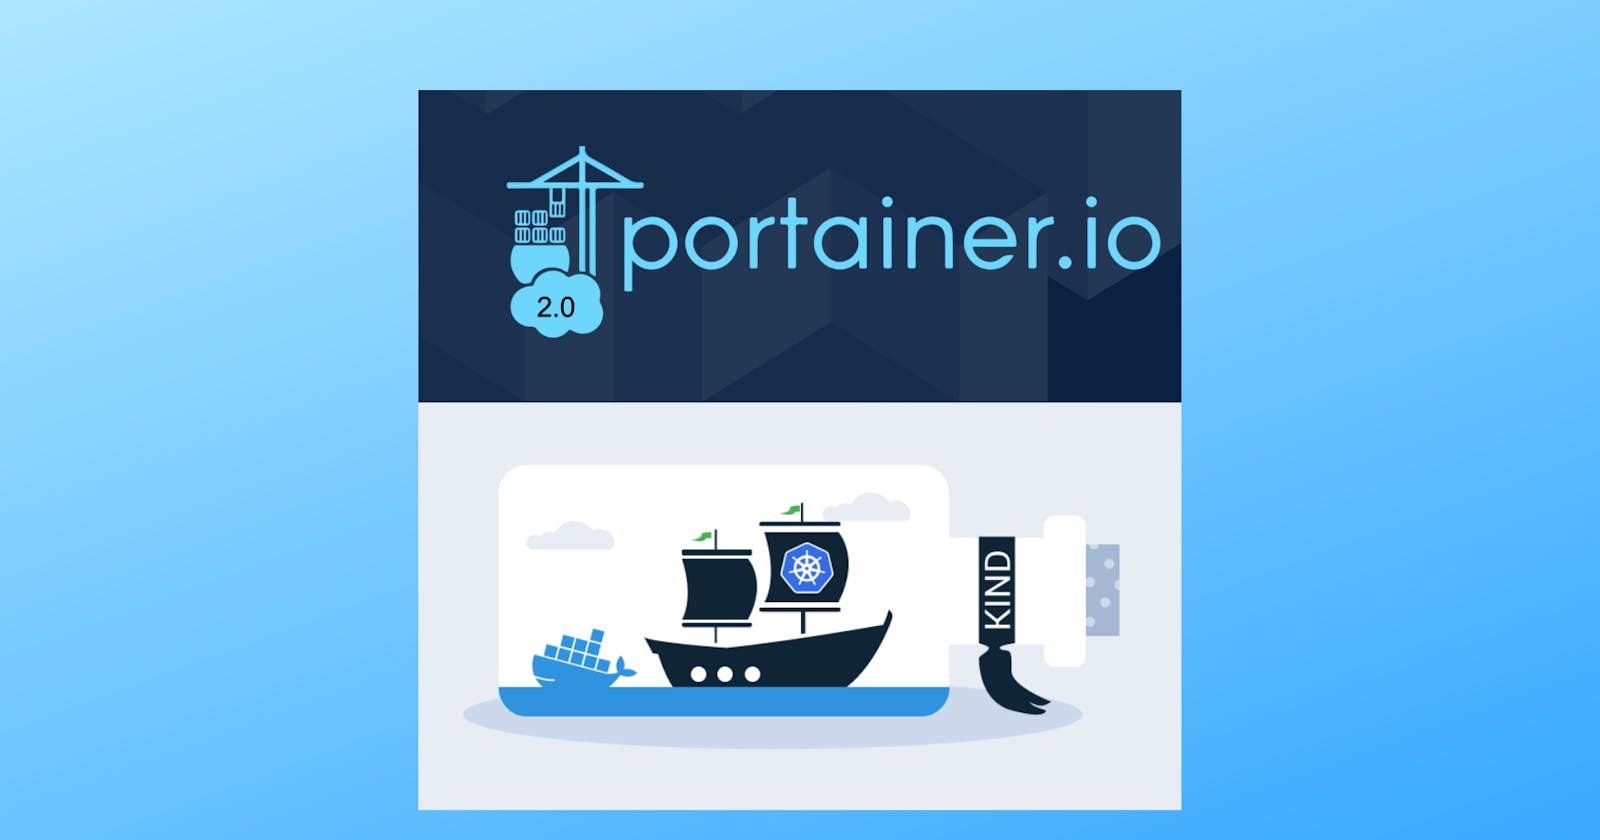 Getting started with Portainer using Kind